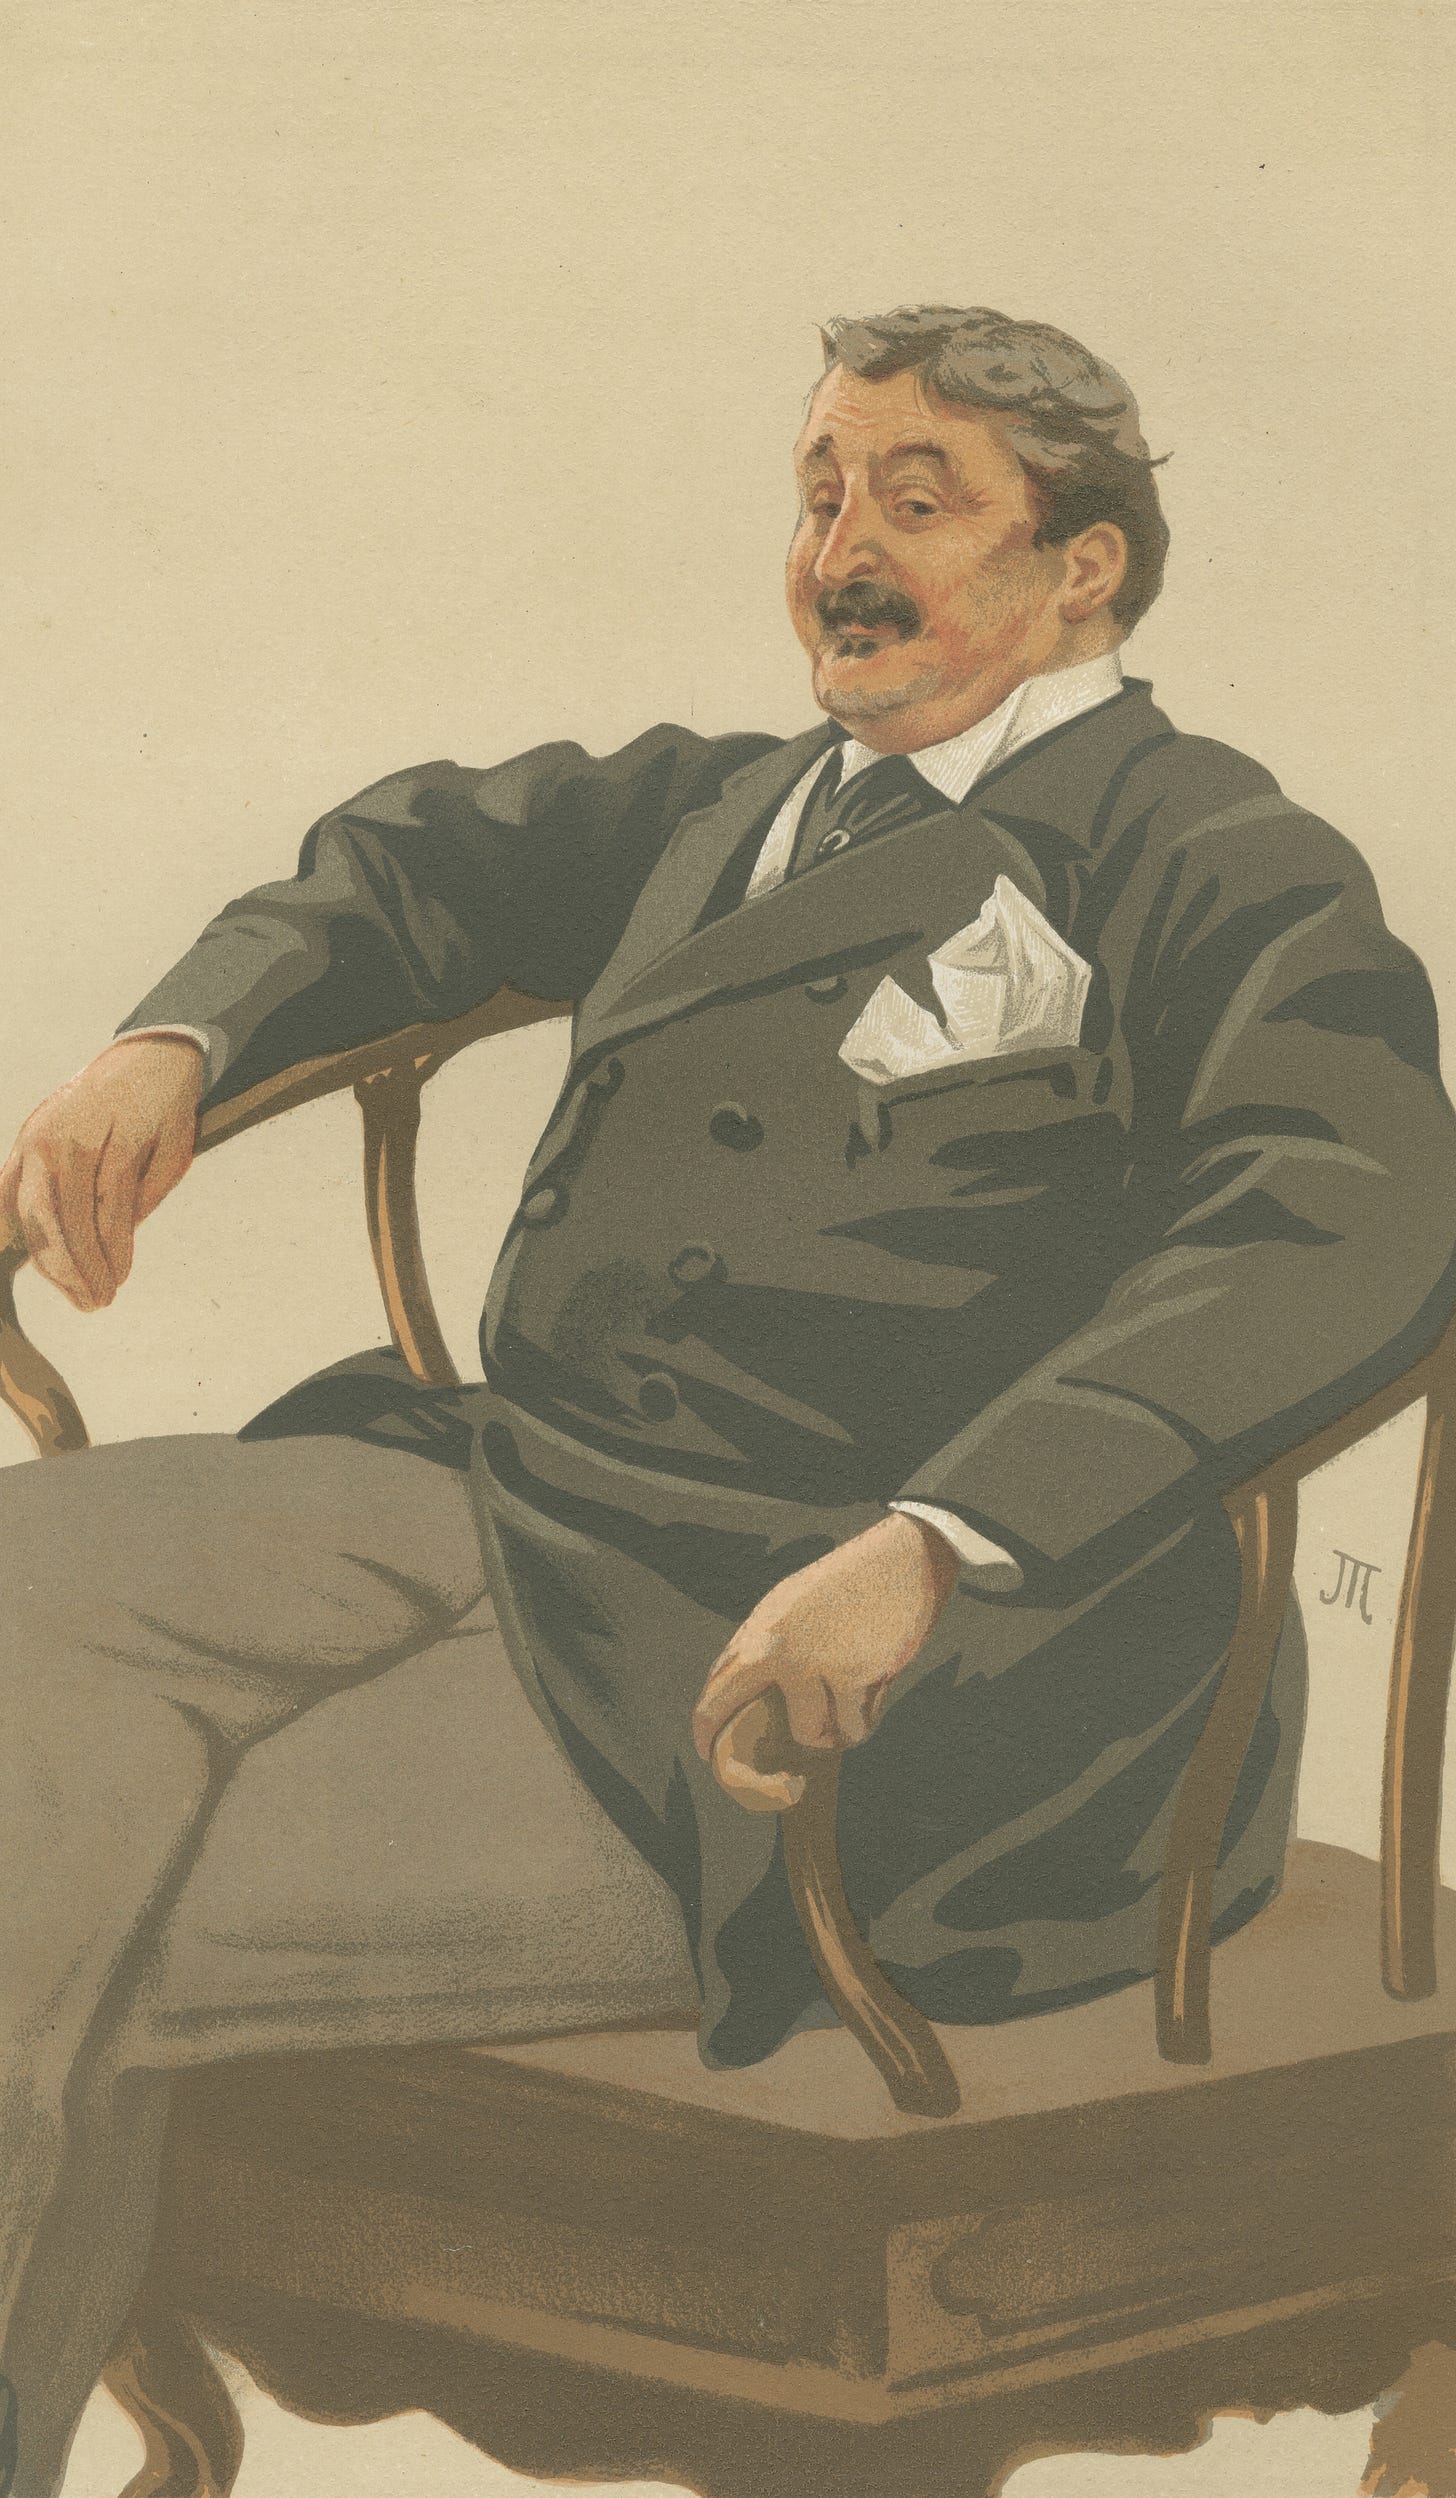 Vanity Fair; Military and Navy; ‘The Queen’s Landlord’, Colonel James Farquharson of Invercauld, August 26, 1876 (1876) by James Tissot.